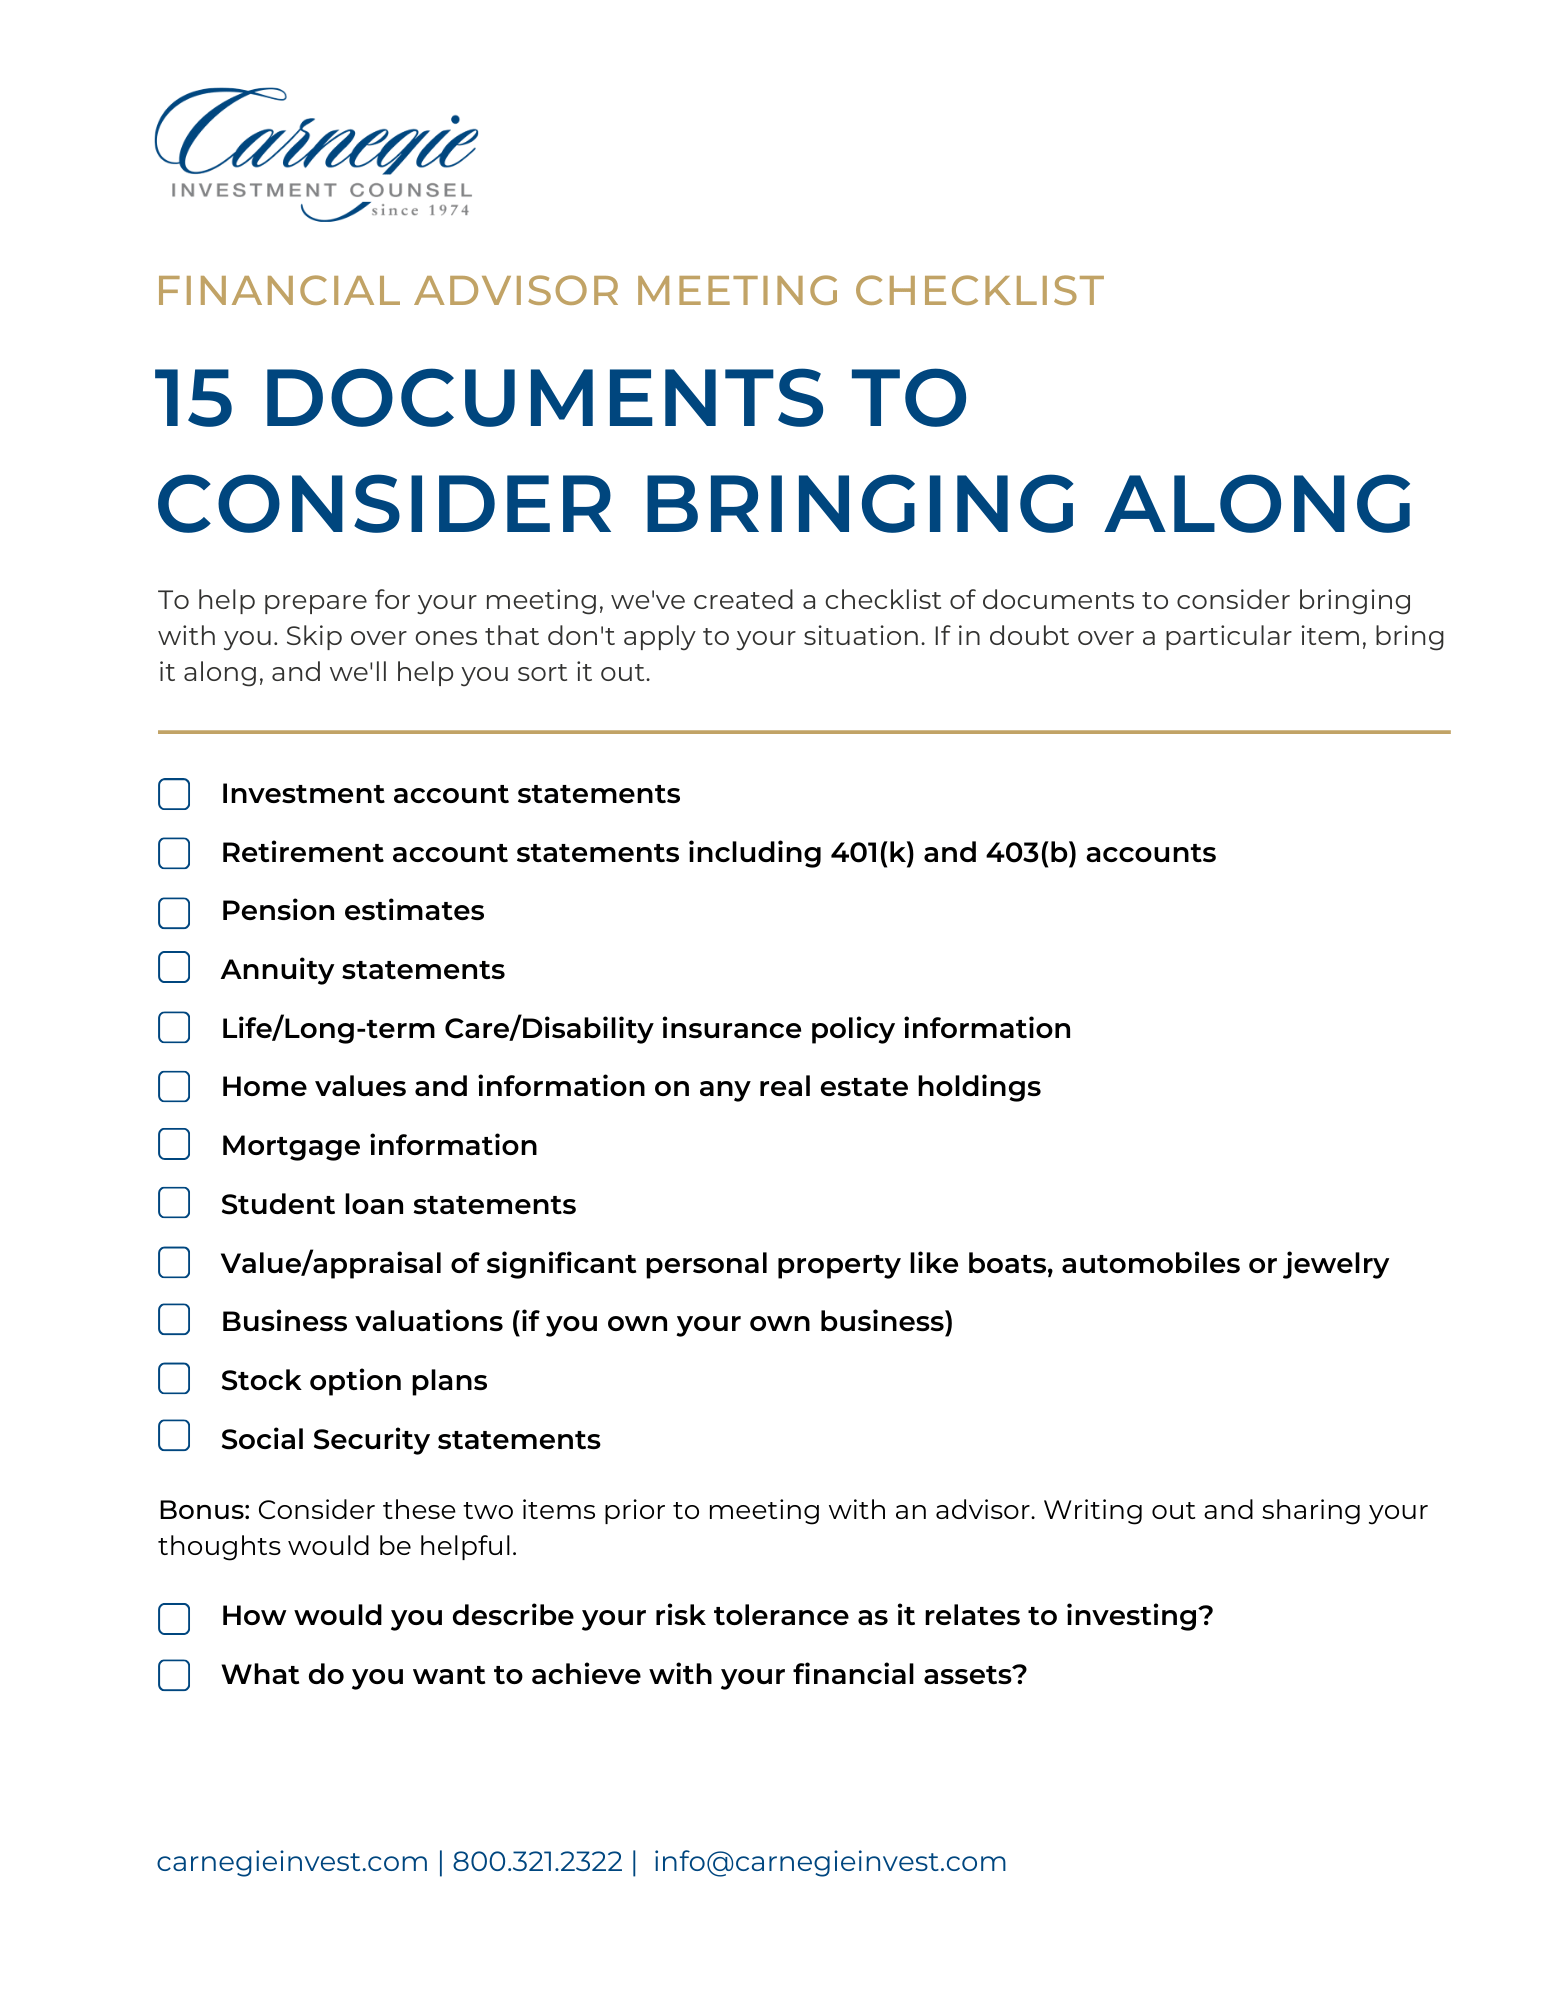 Financial Advisor Meeting Checklist_ 15 Documents to Bring to Your Meeting